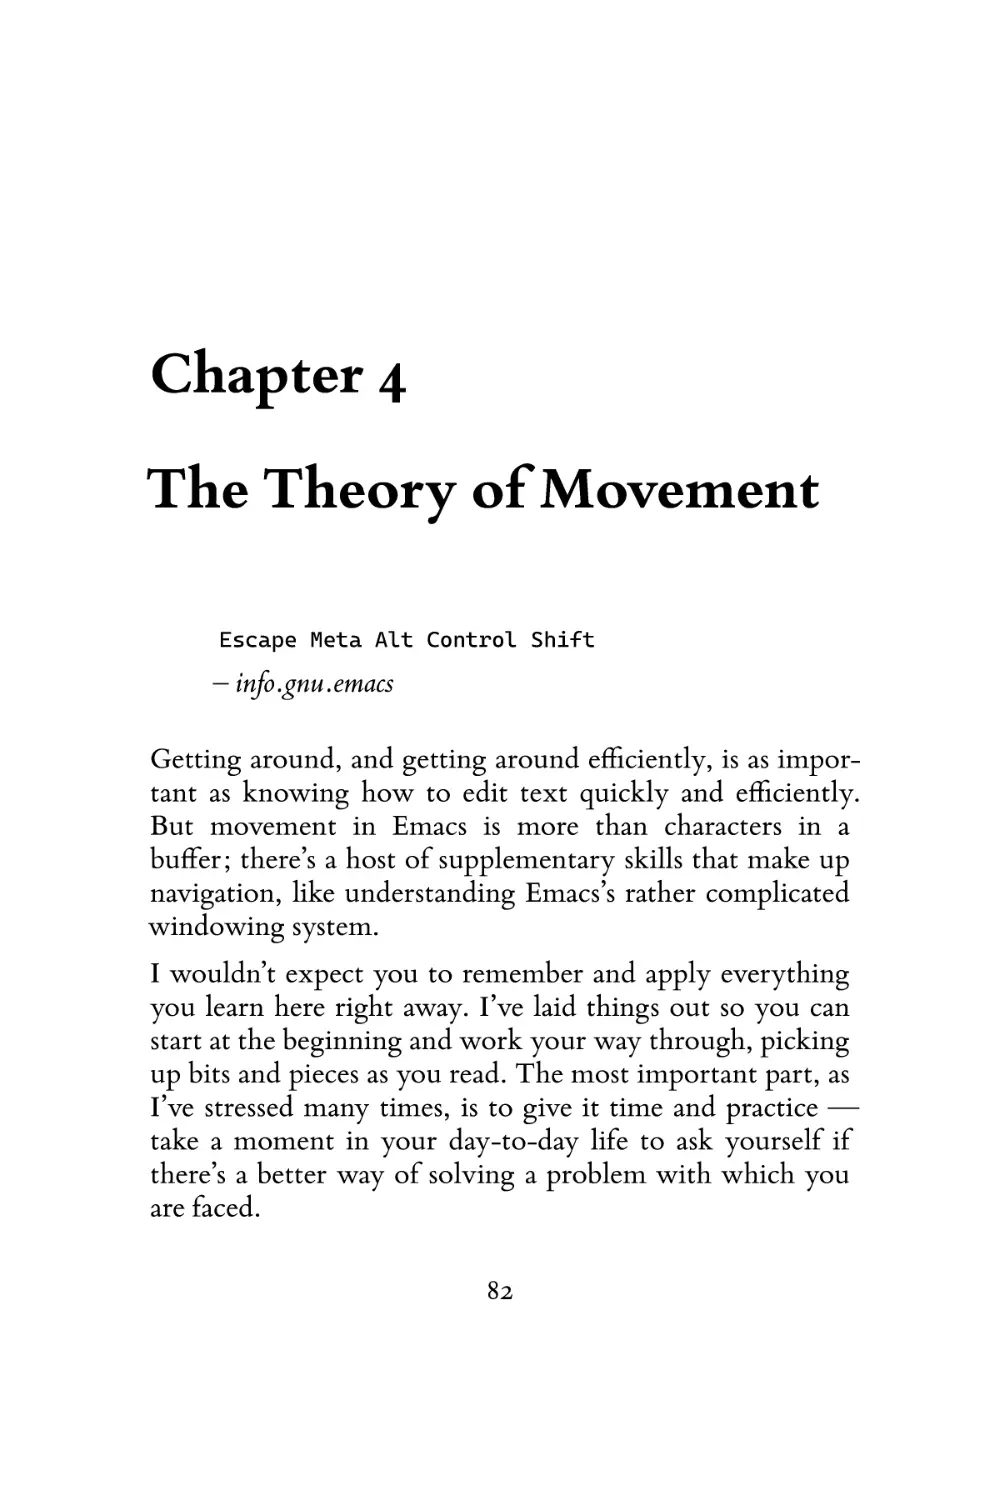 The Theory of Movement